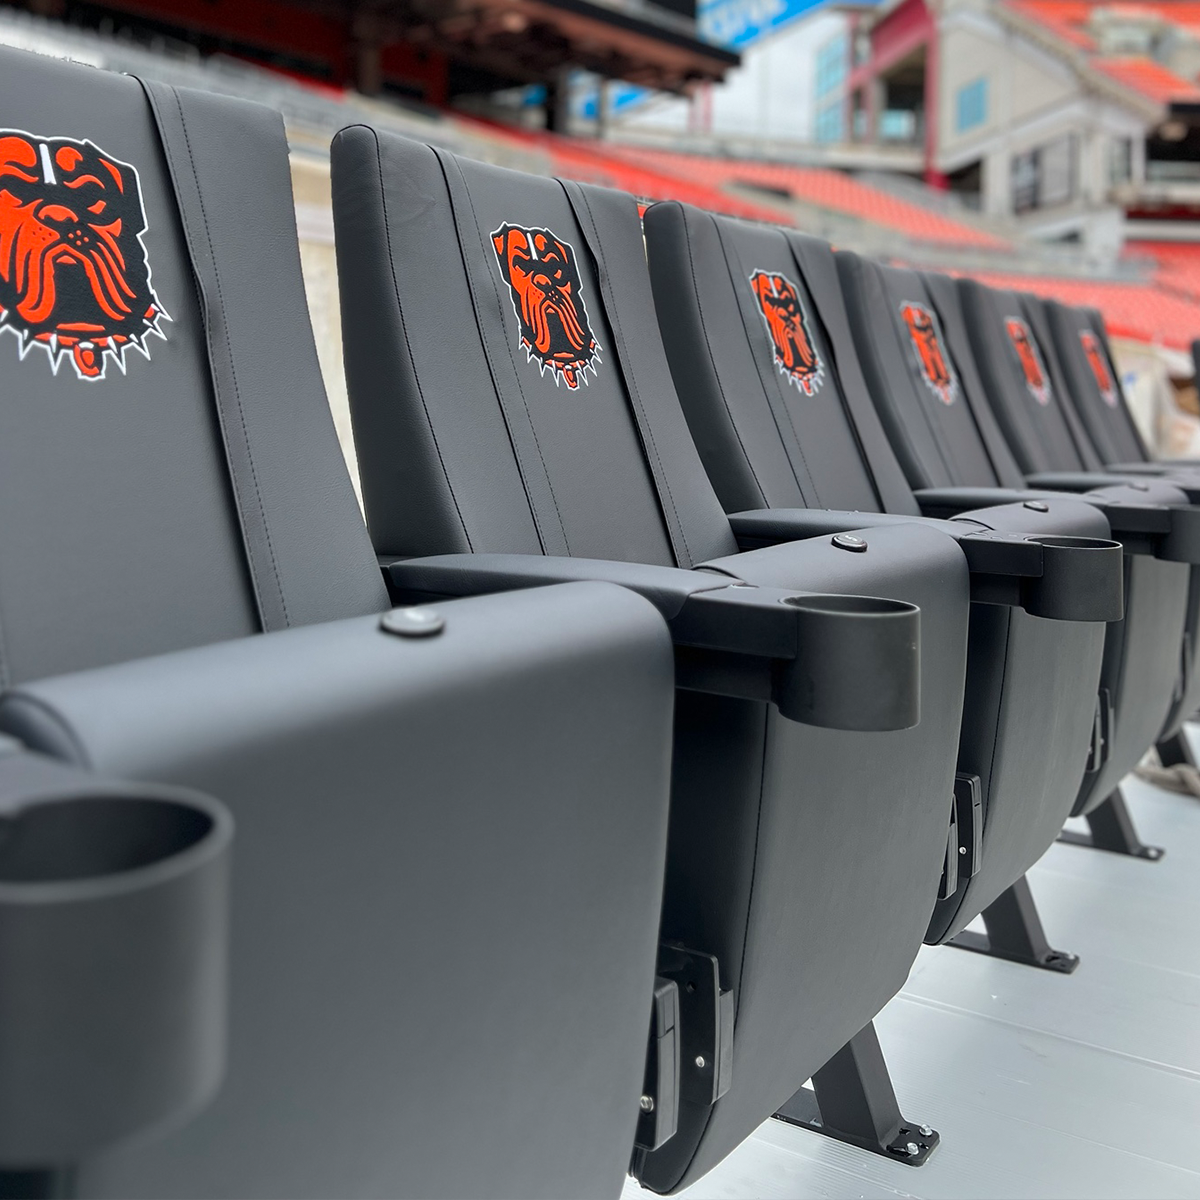 SuiteMax 3.5 VIP Seats with Detroit Tigers Cooperstown Logo